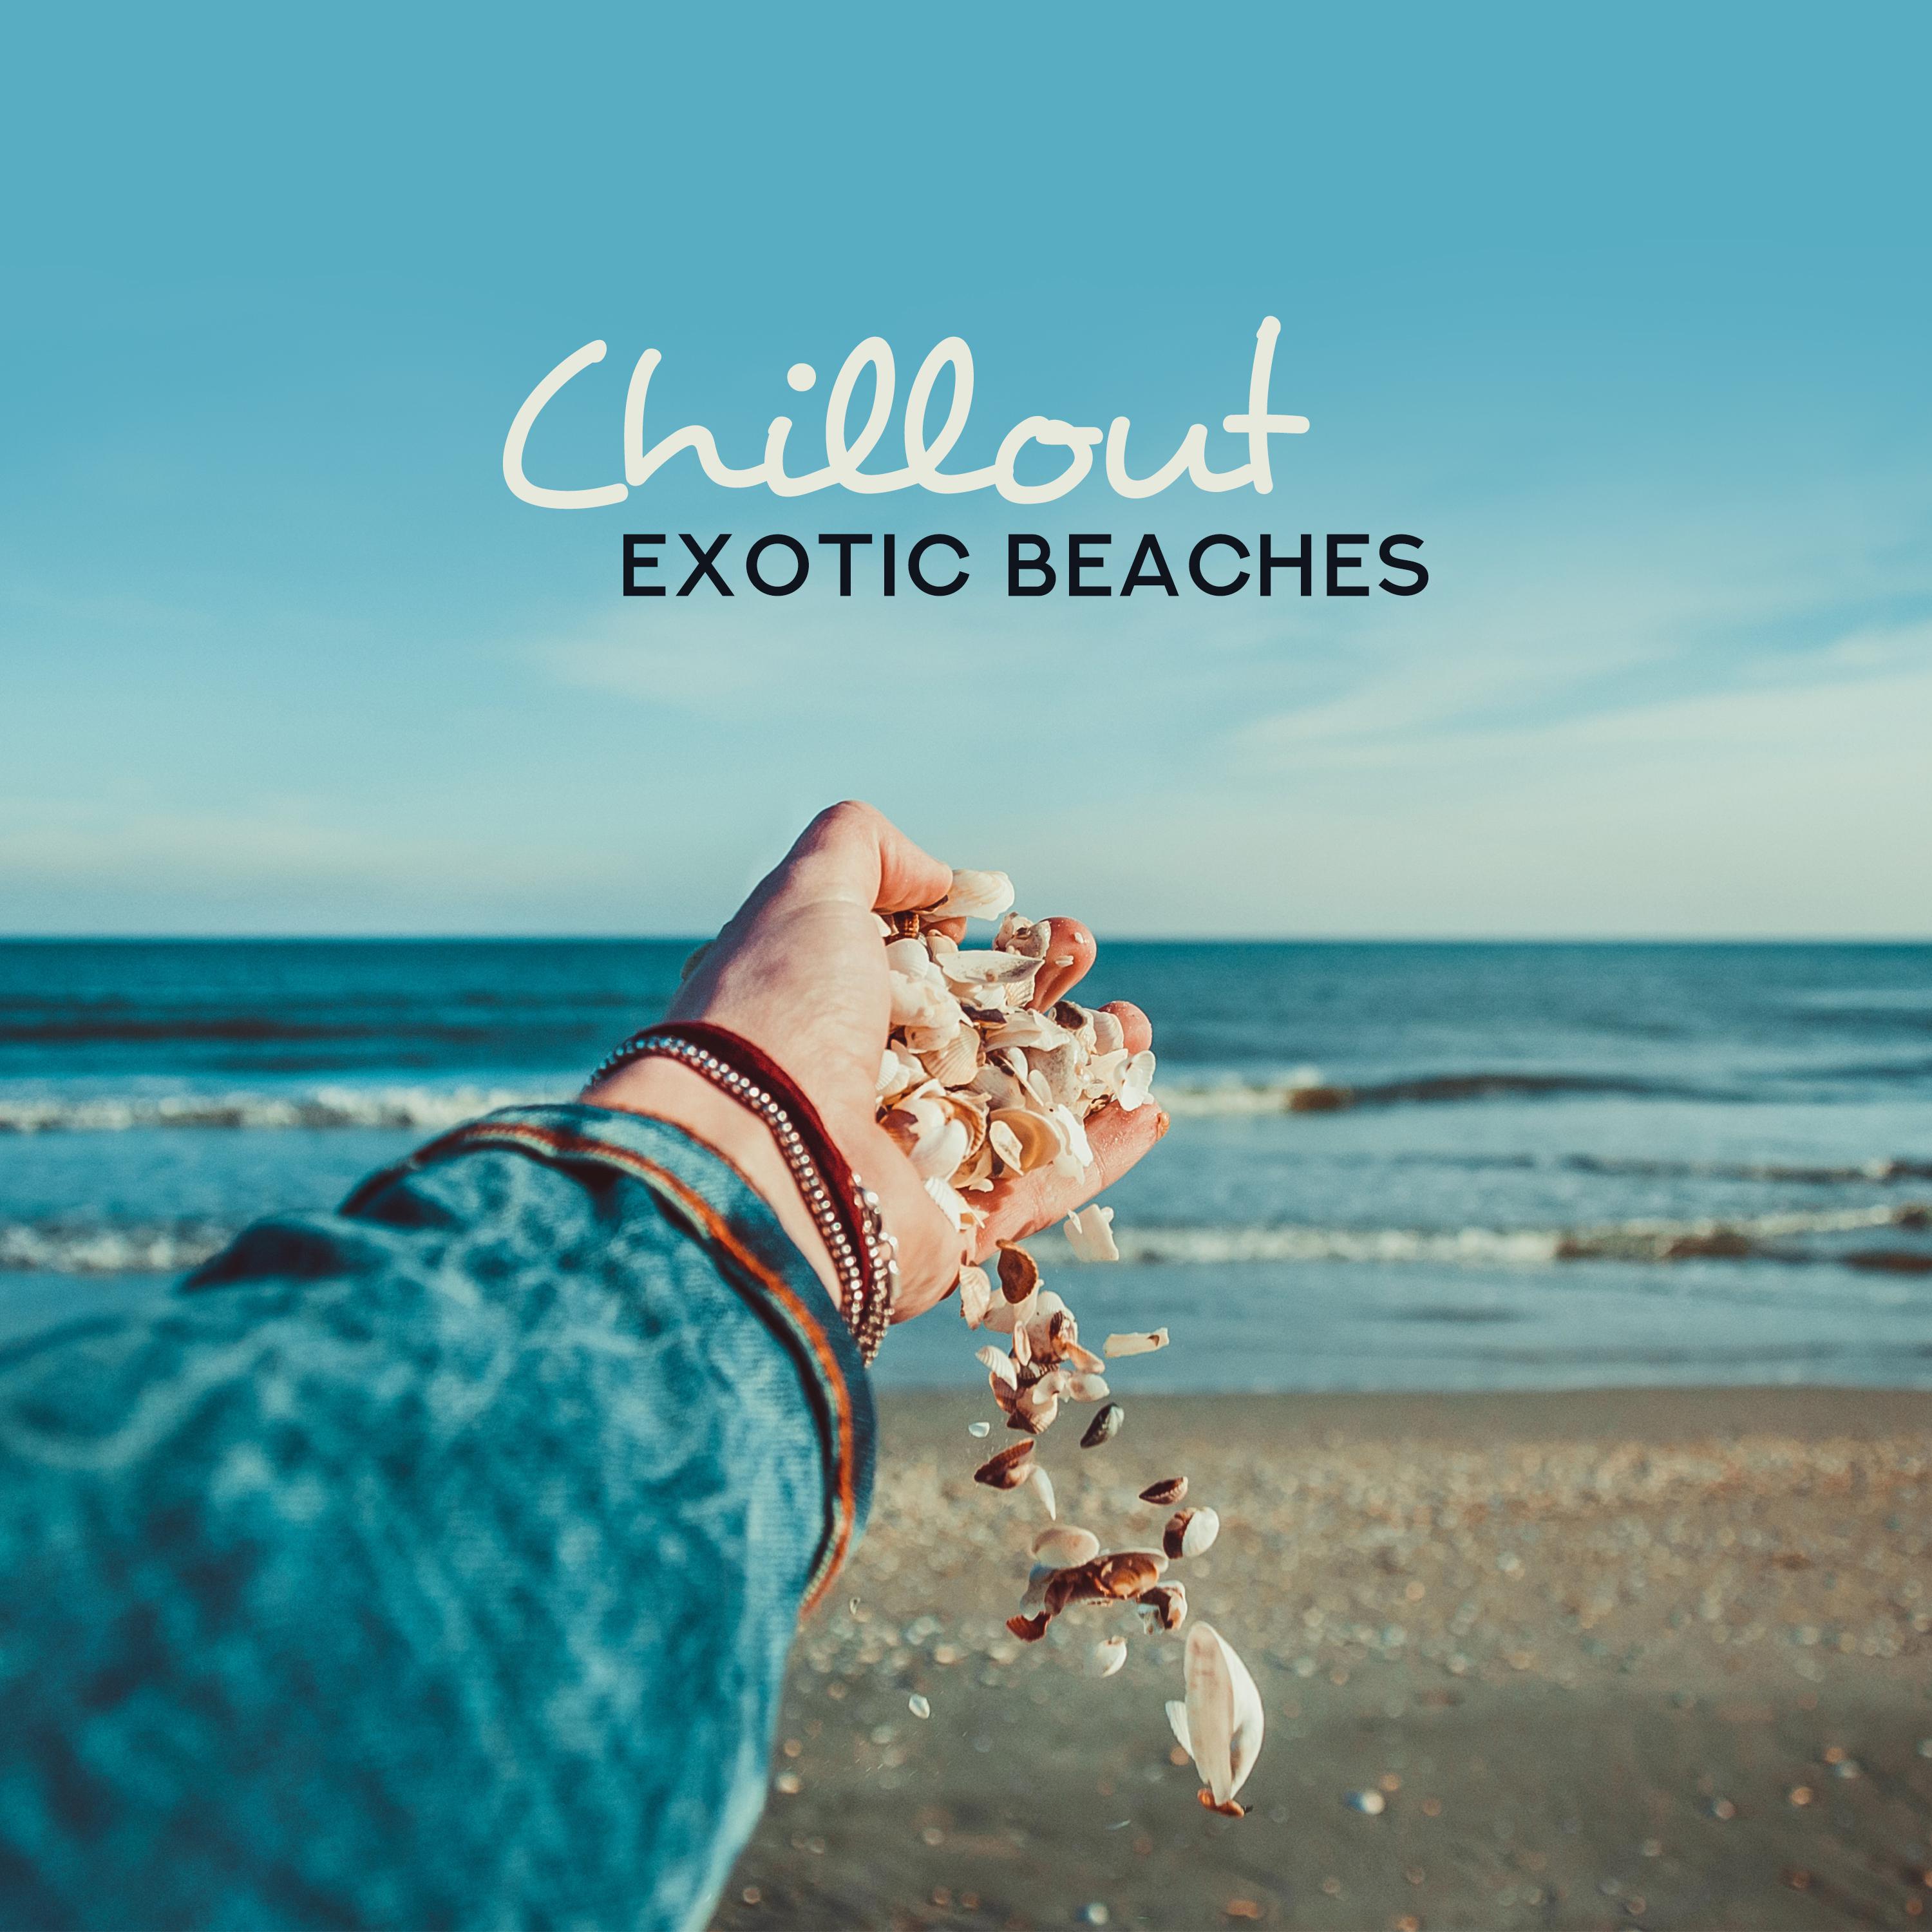 Chillout Exotic Beaches - Slow Melodies That'll Help You Relax and Unwind